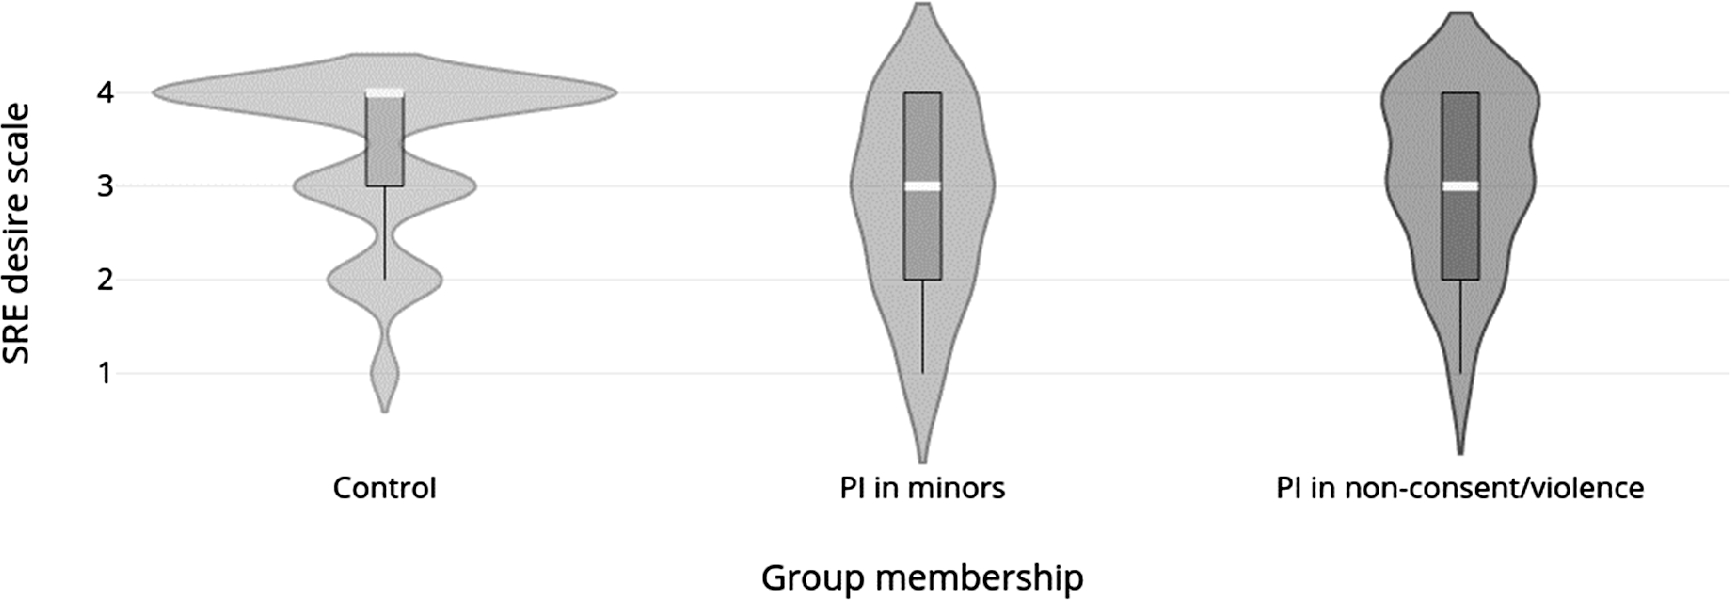 A violin plot showing expressed SRE desire rated on a four-point scale (1 – completely agree, 2 – agree, 3 – disagree, 4 – completely disagree) by groups.